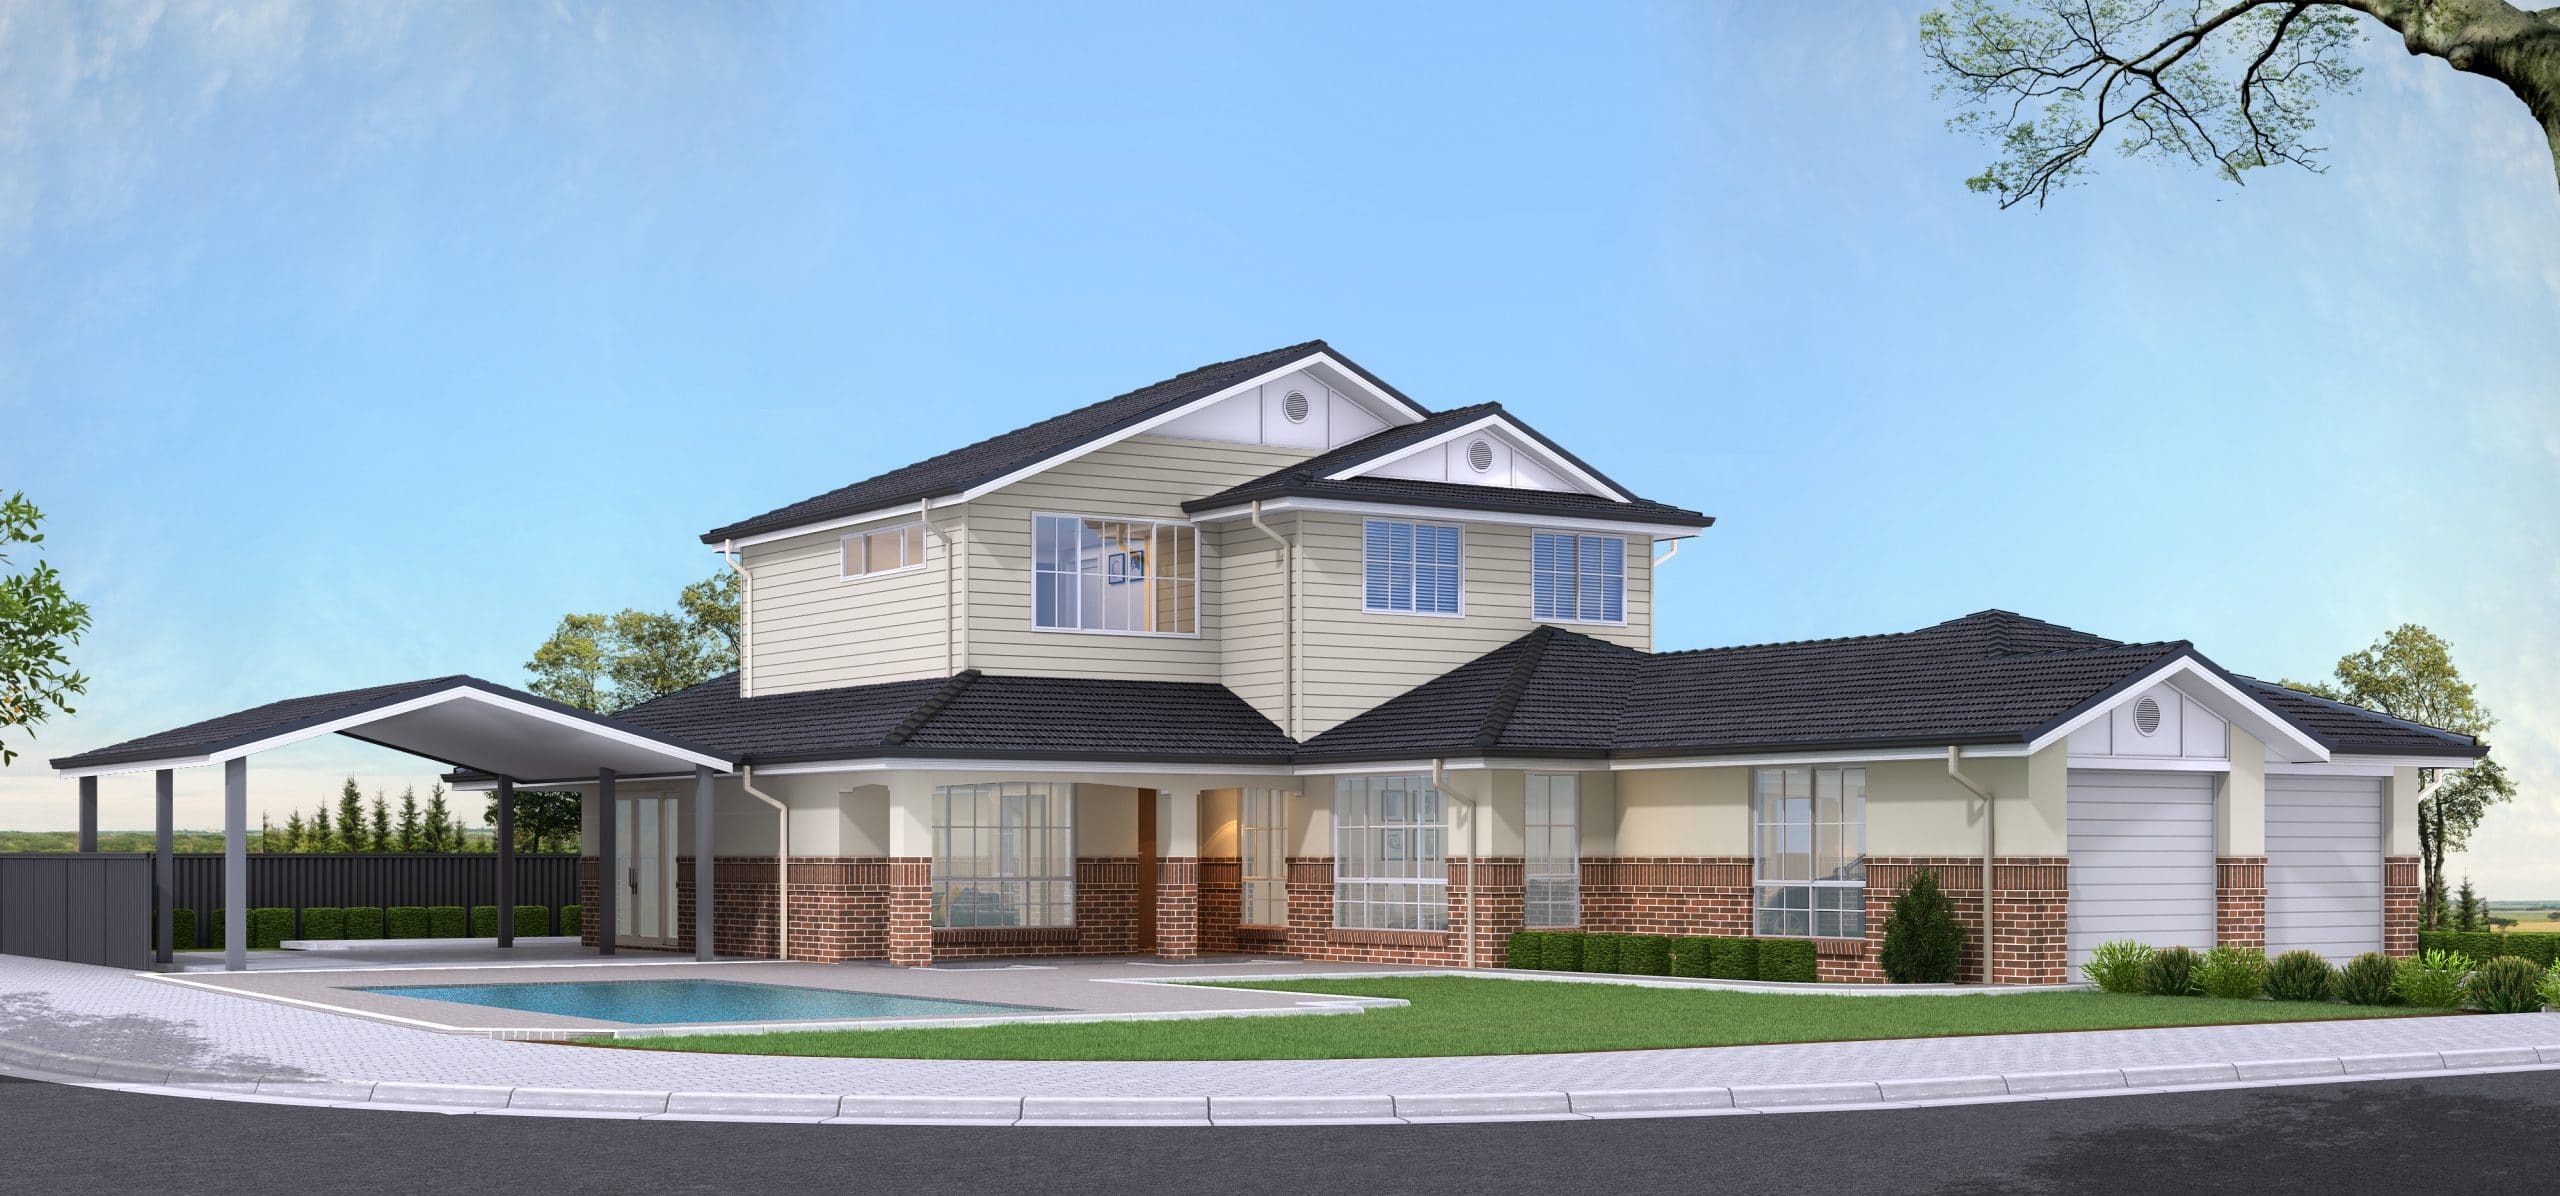 Render of a first floor addition to a home in Harrington Park